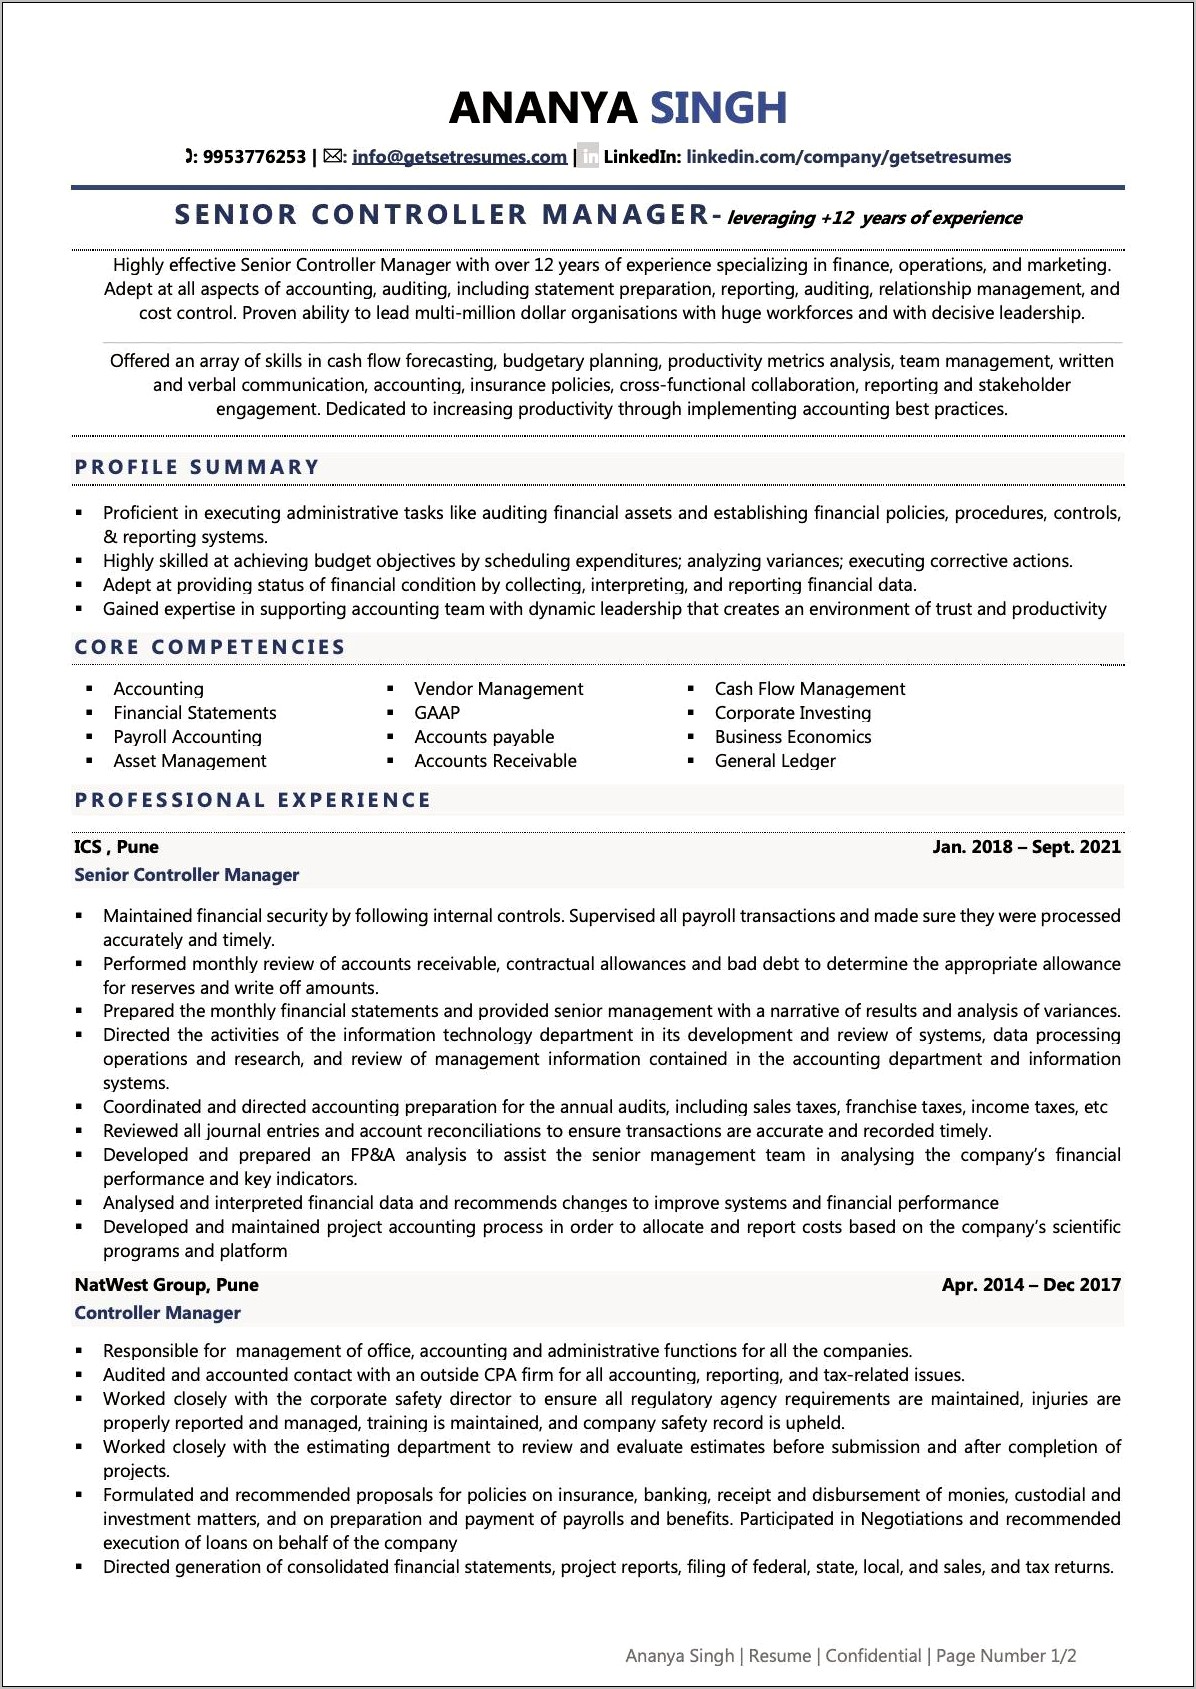 Sample Resume For Payroll Manager In India